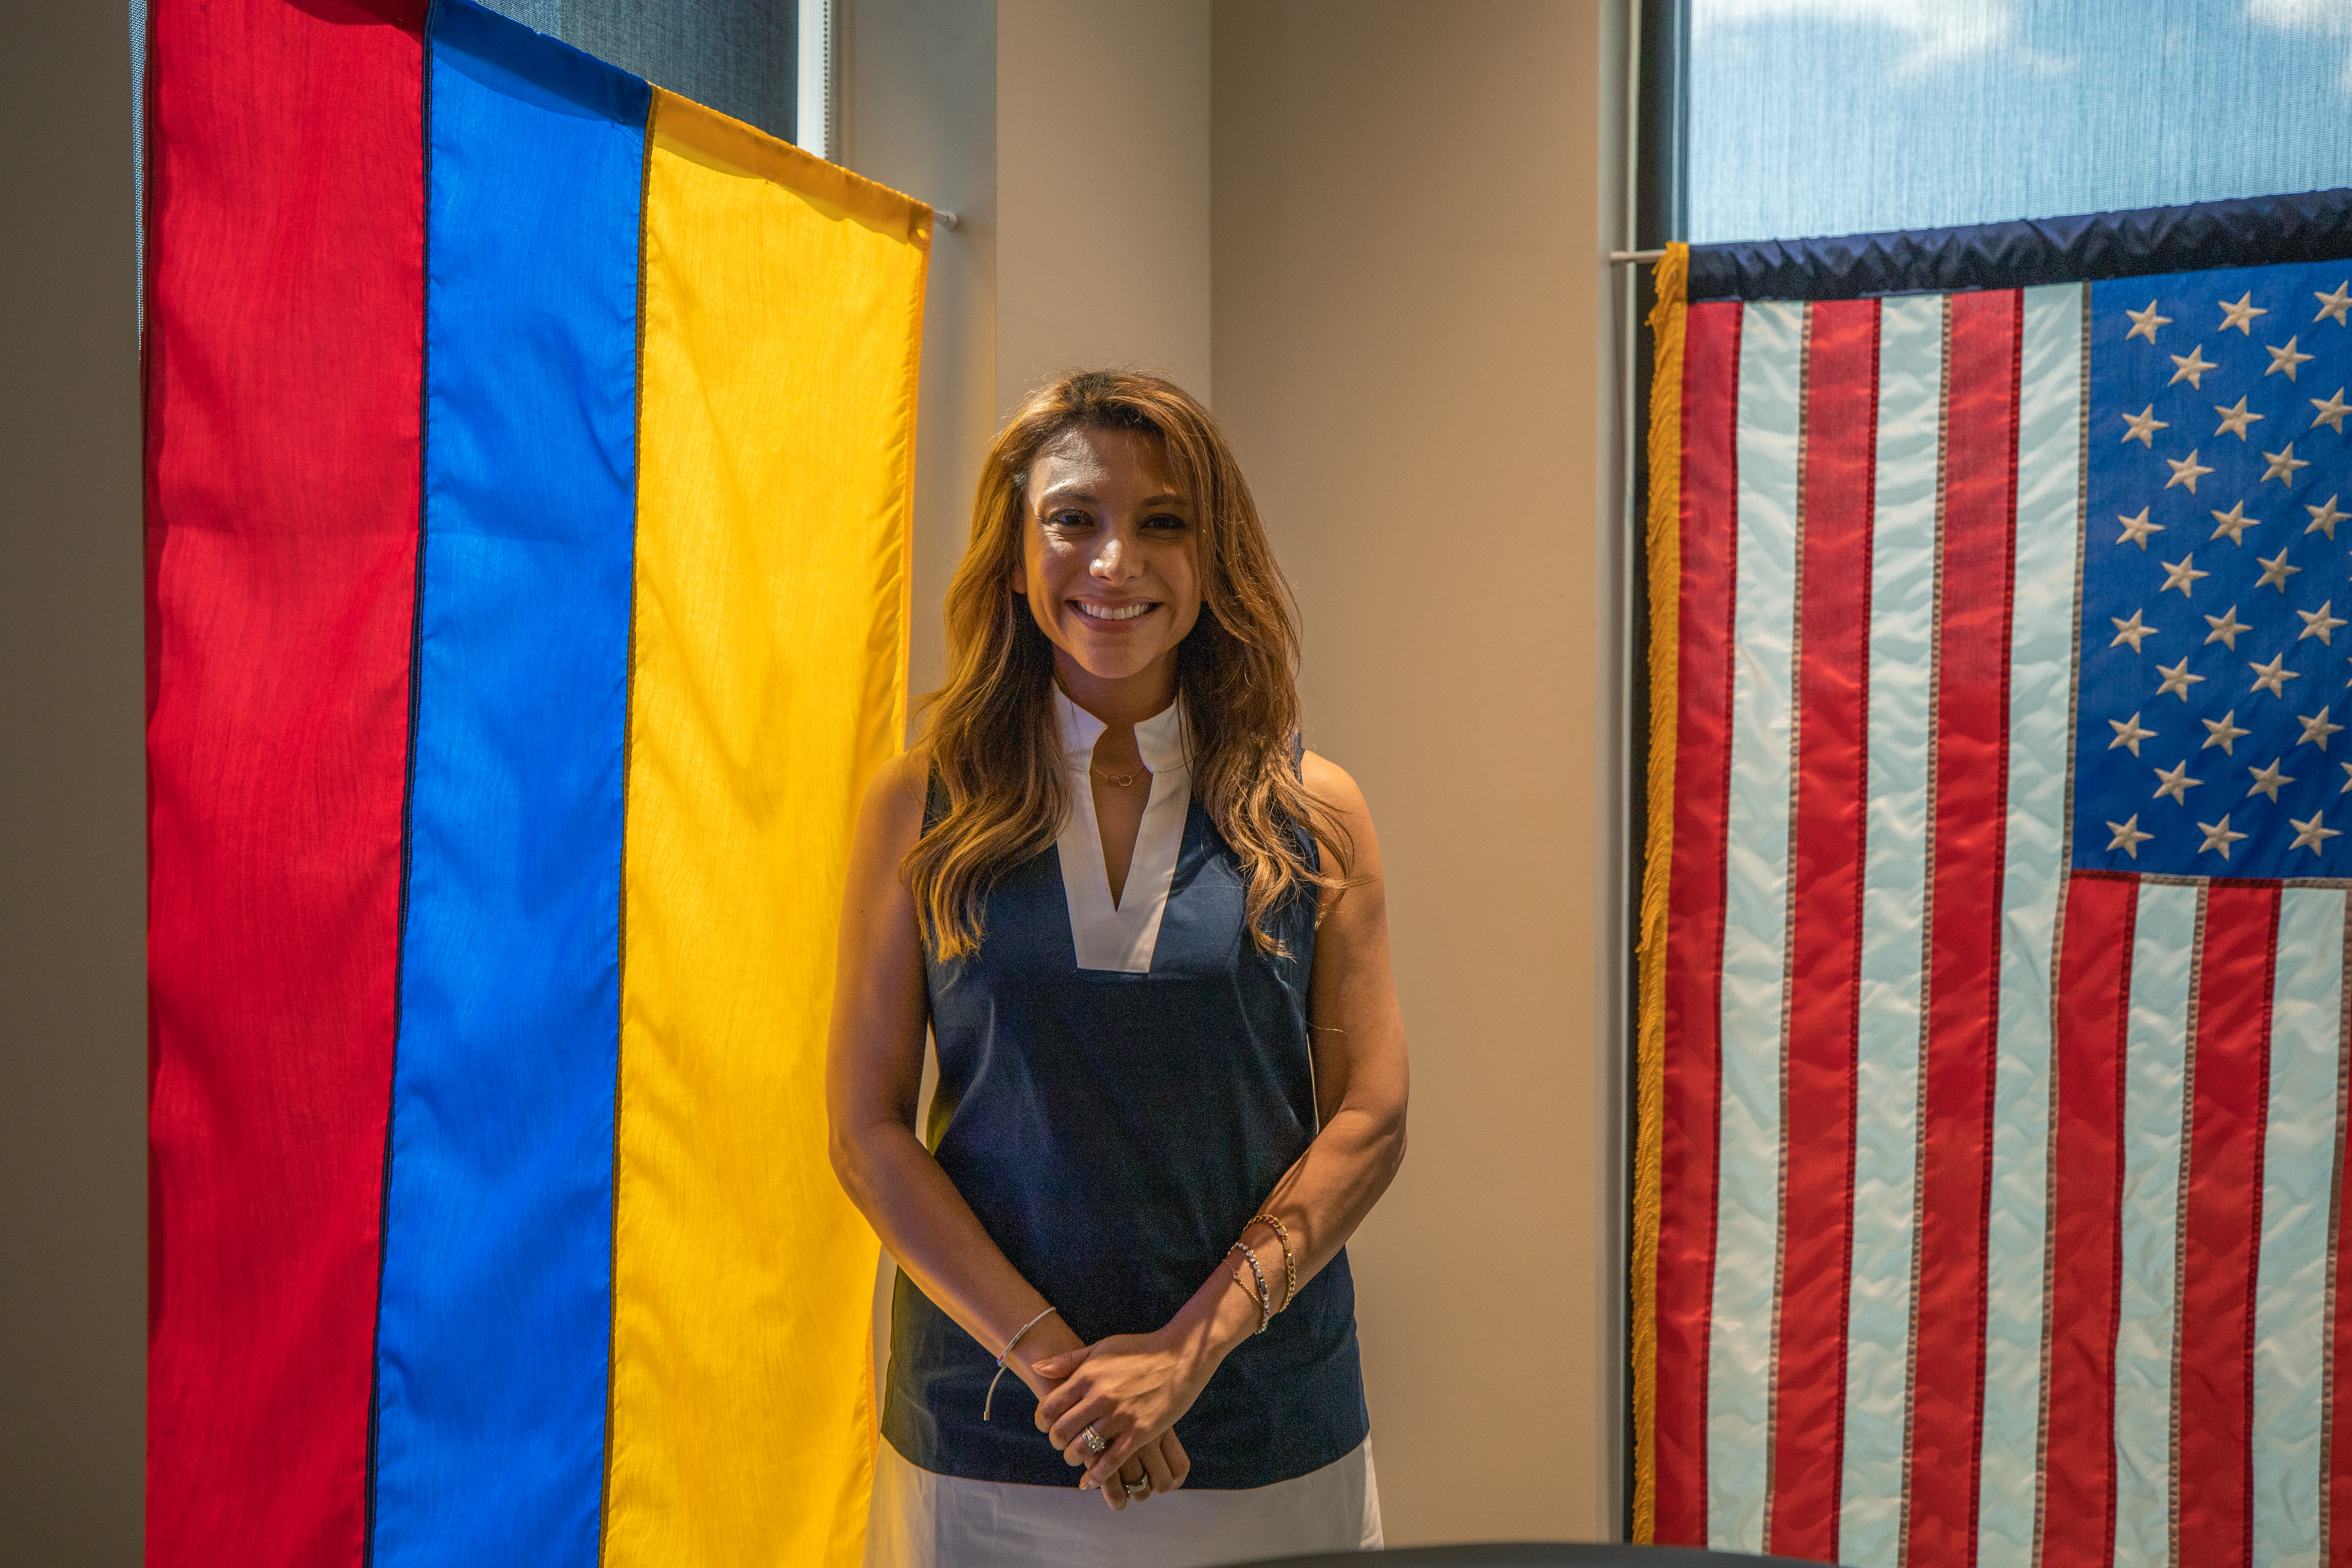 Liliana poses in front of the Columbian and American flags